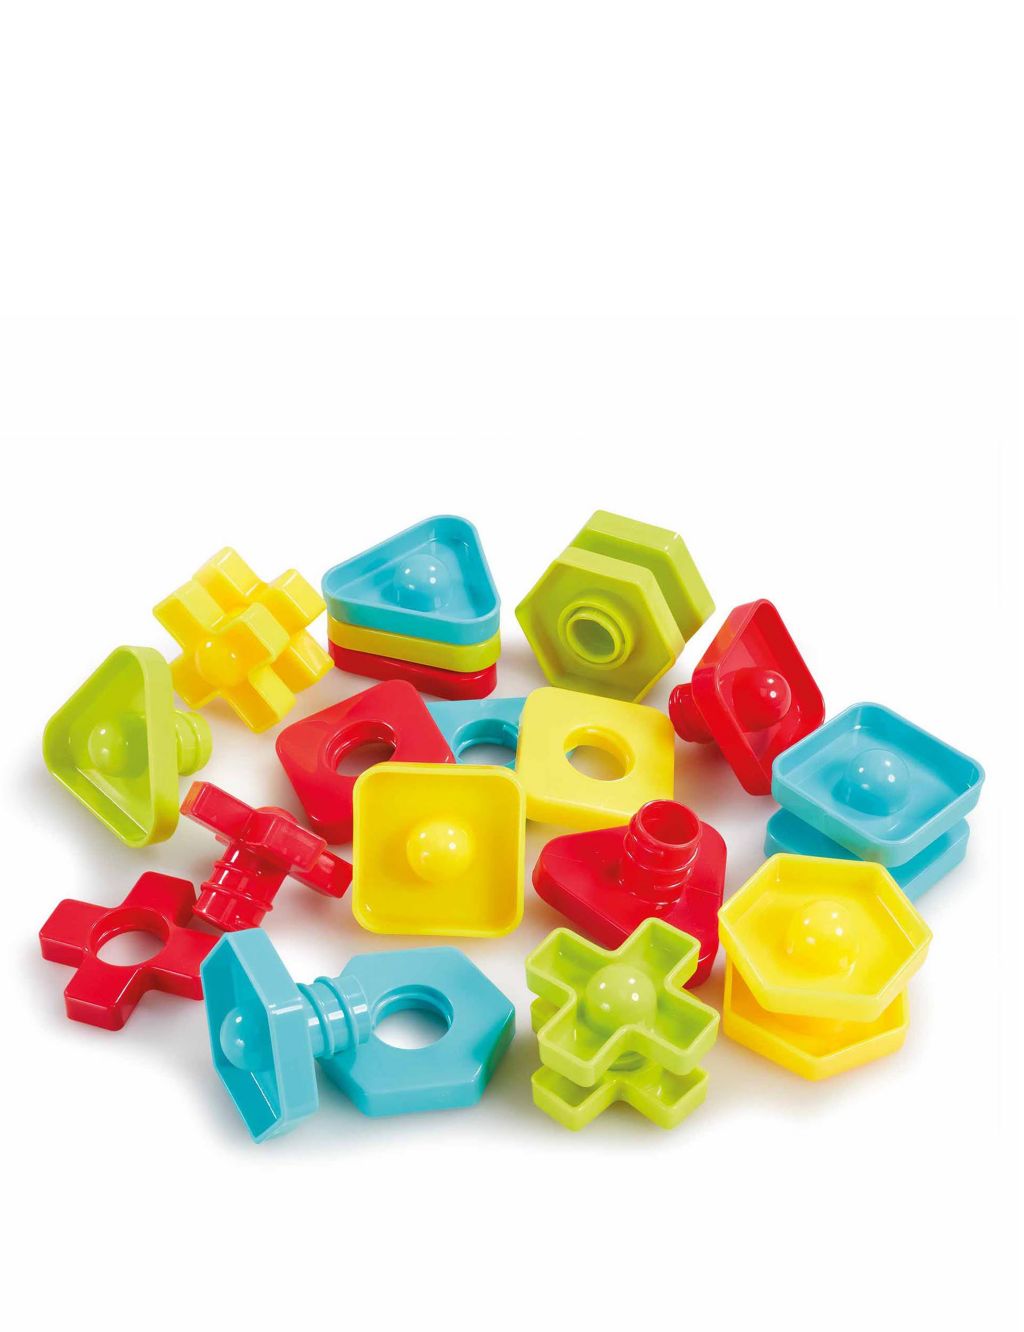 Twisting Nuts and Bolts Set (18+ Mths) image 1